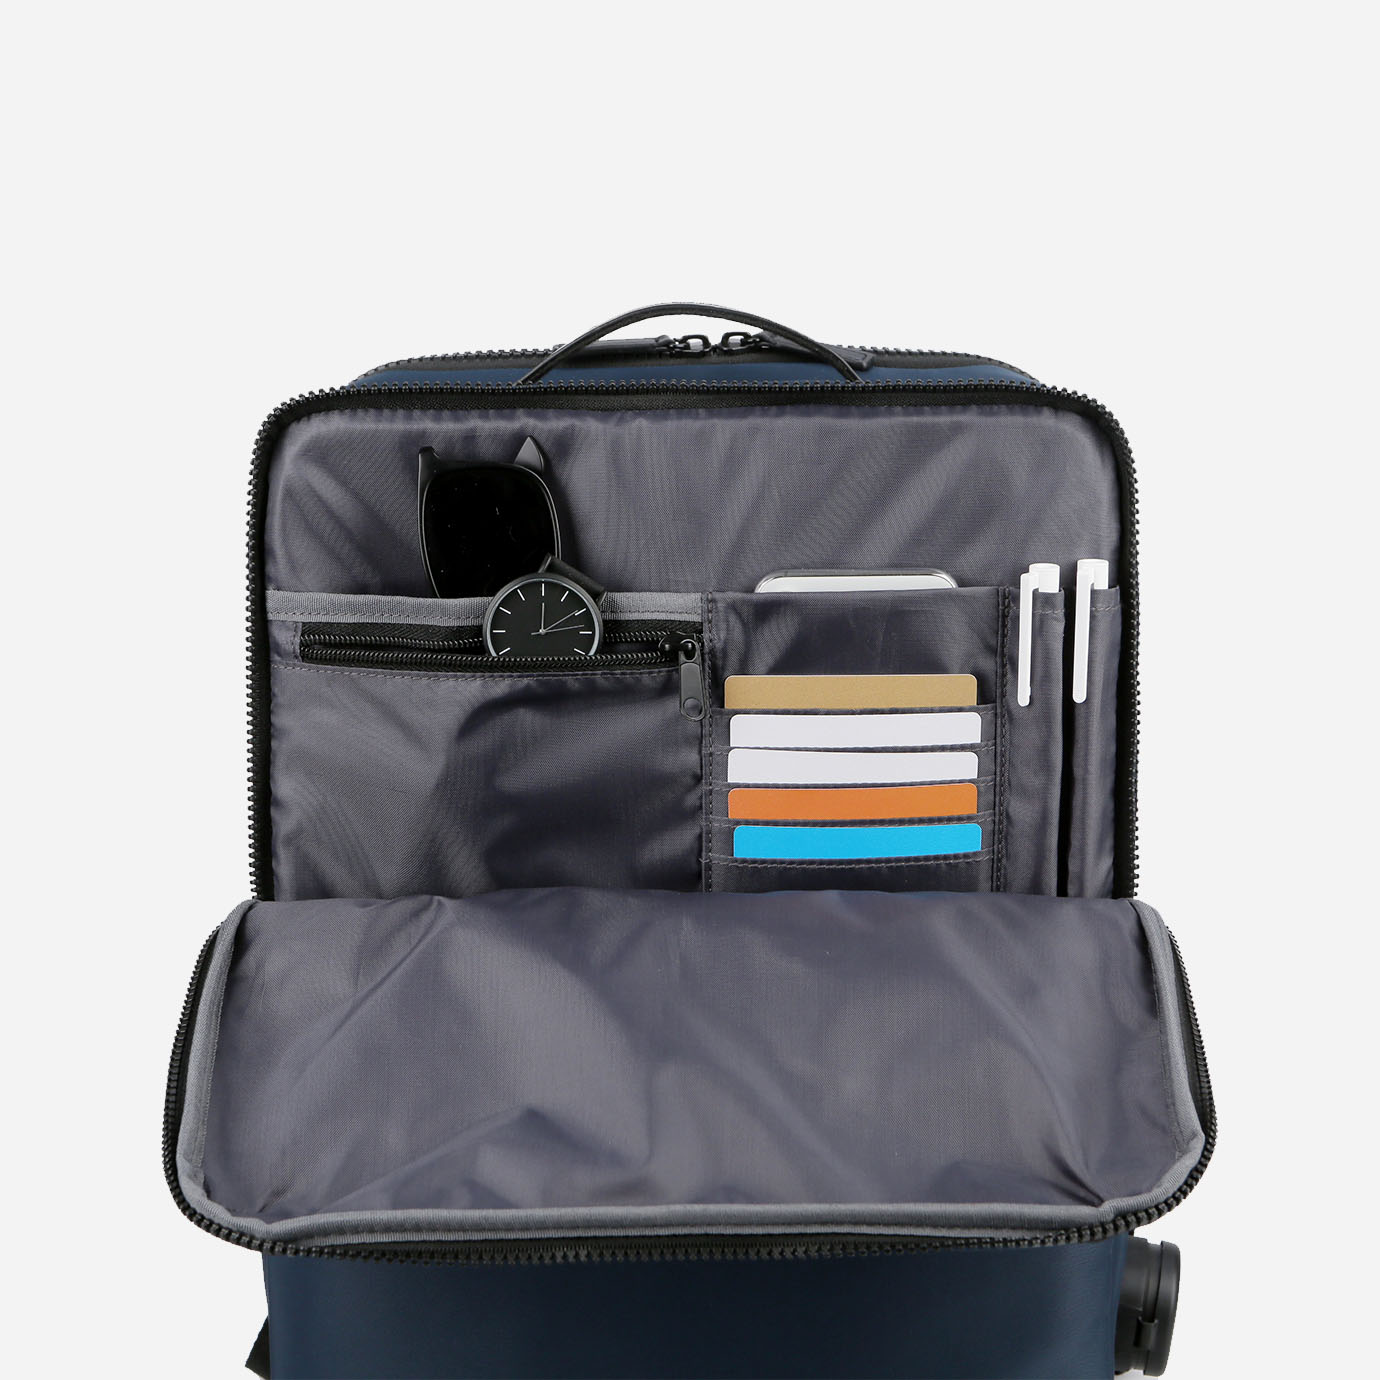 Nordace Laval - Smart Backpack